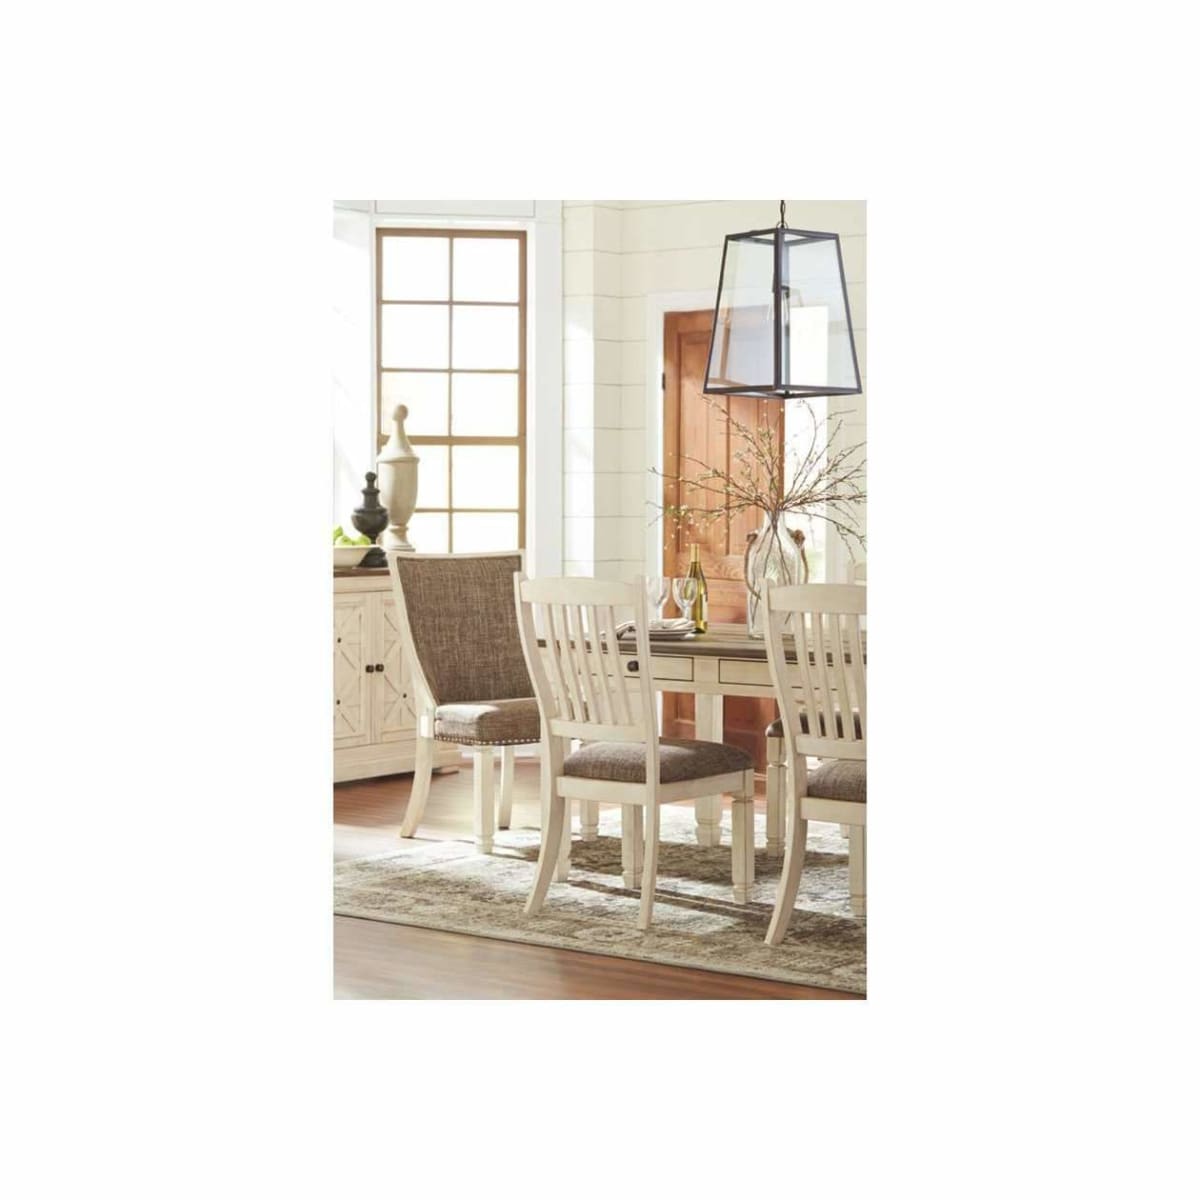 Bolanburg Dining Room Table With 6 Chairs - DININGCOUNTERHEIGHT